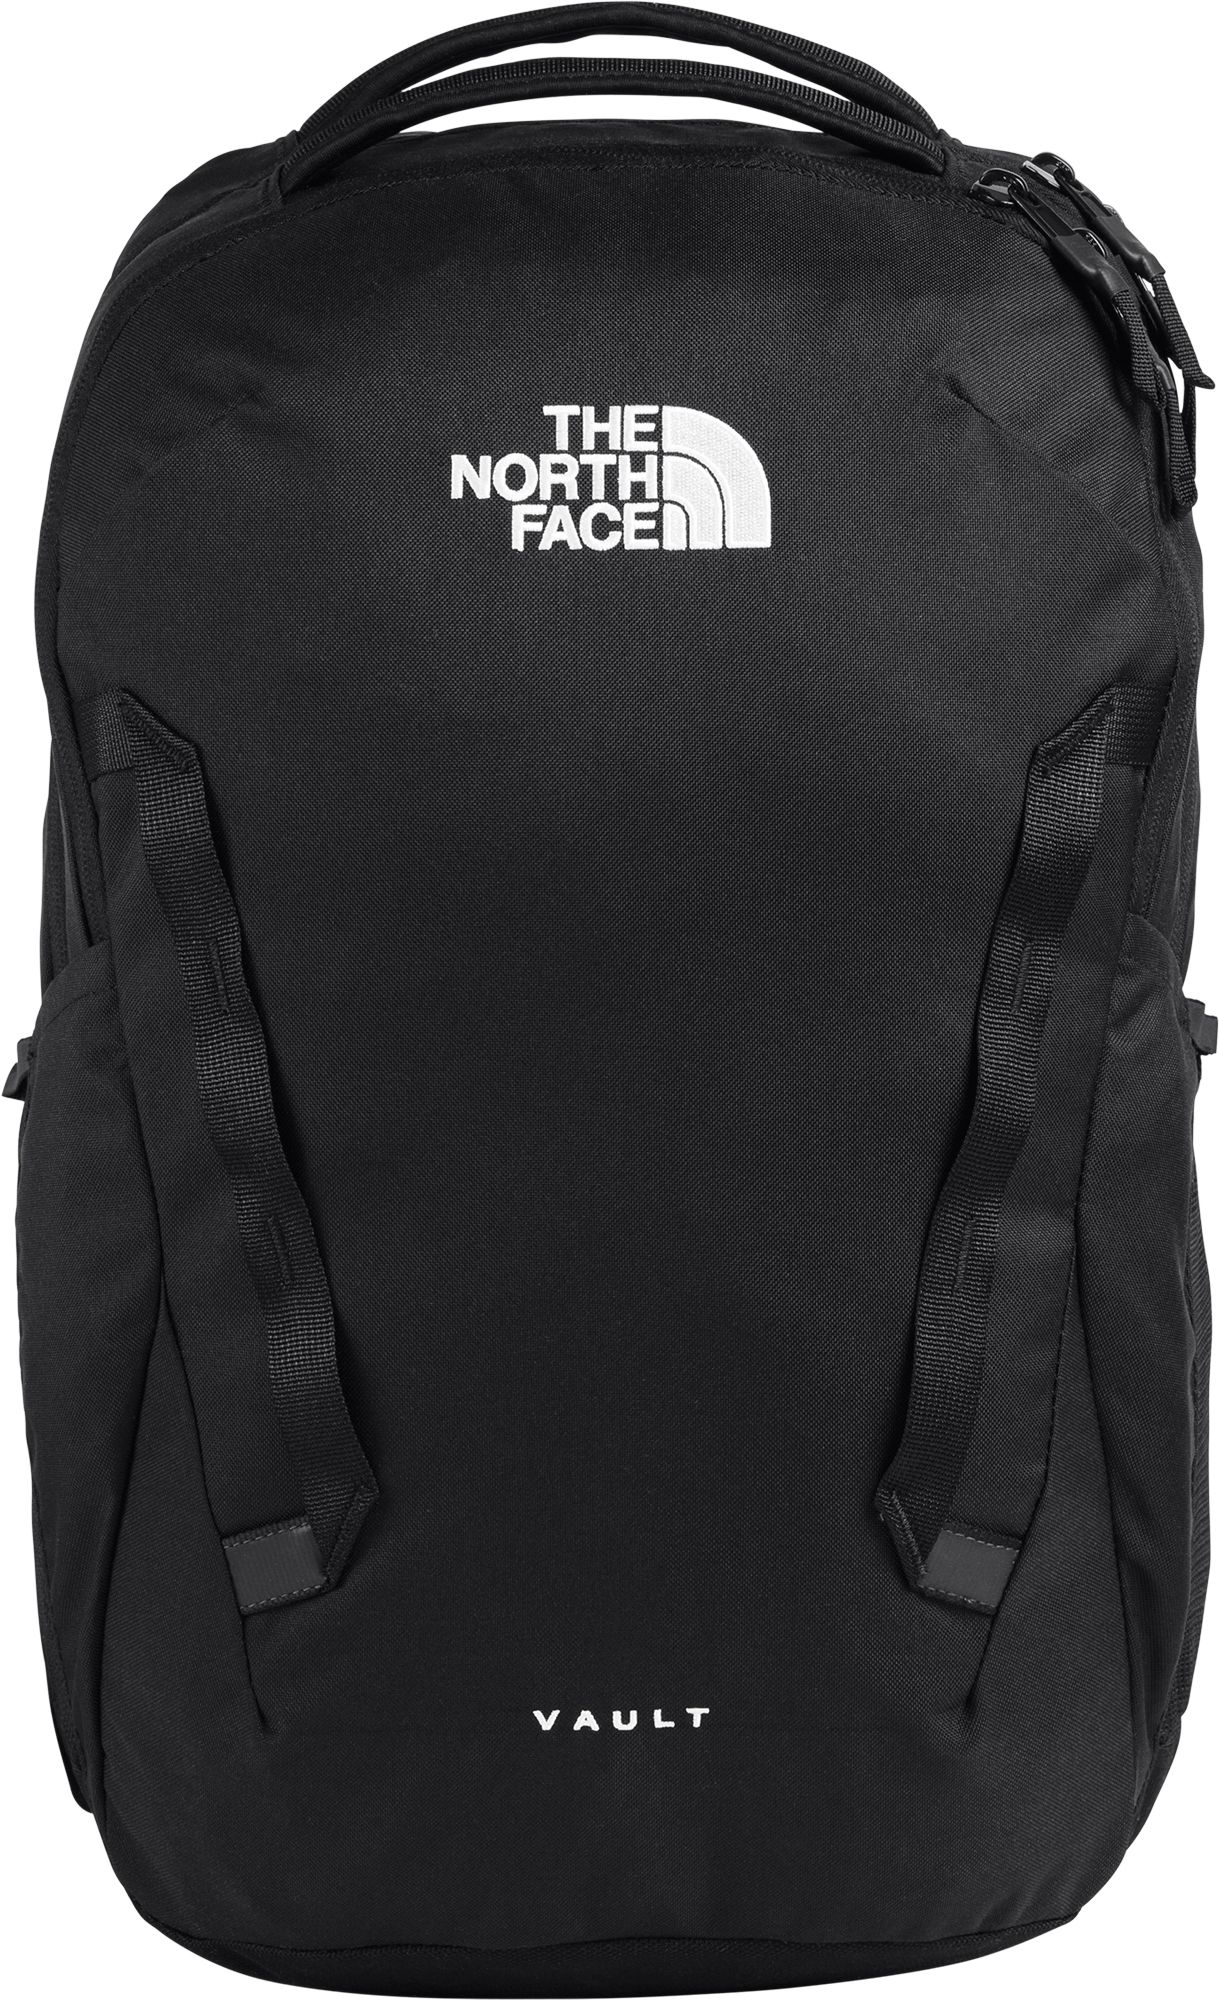 the north face vault daypack